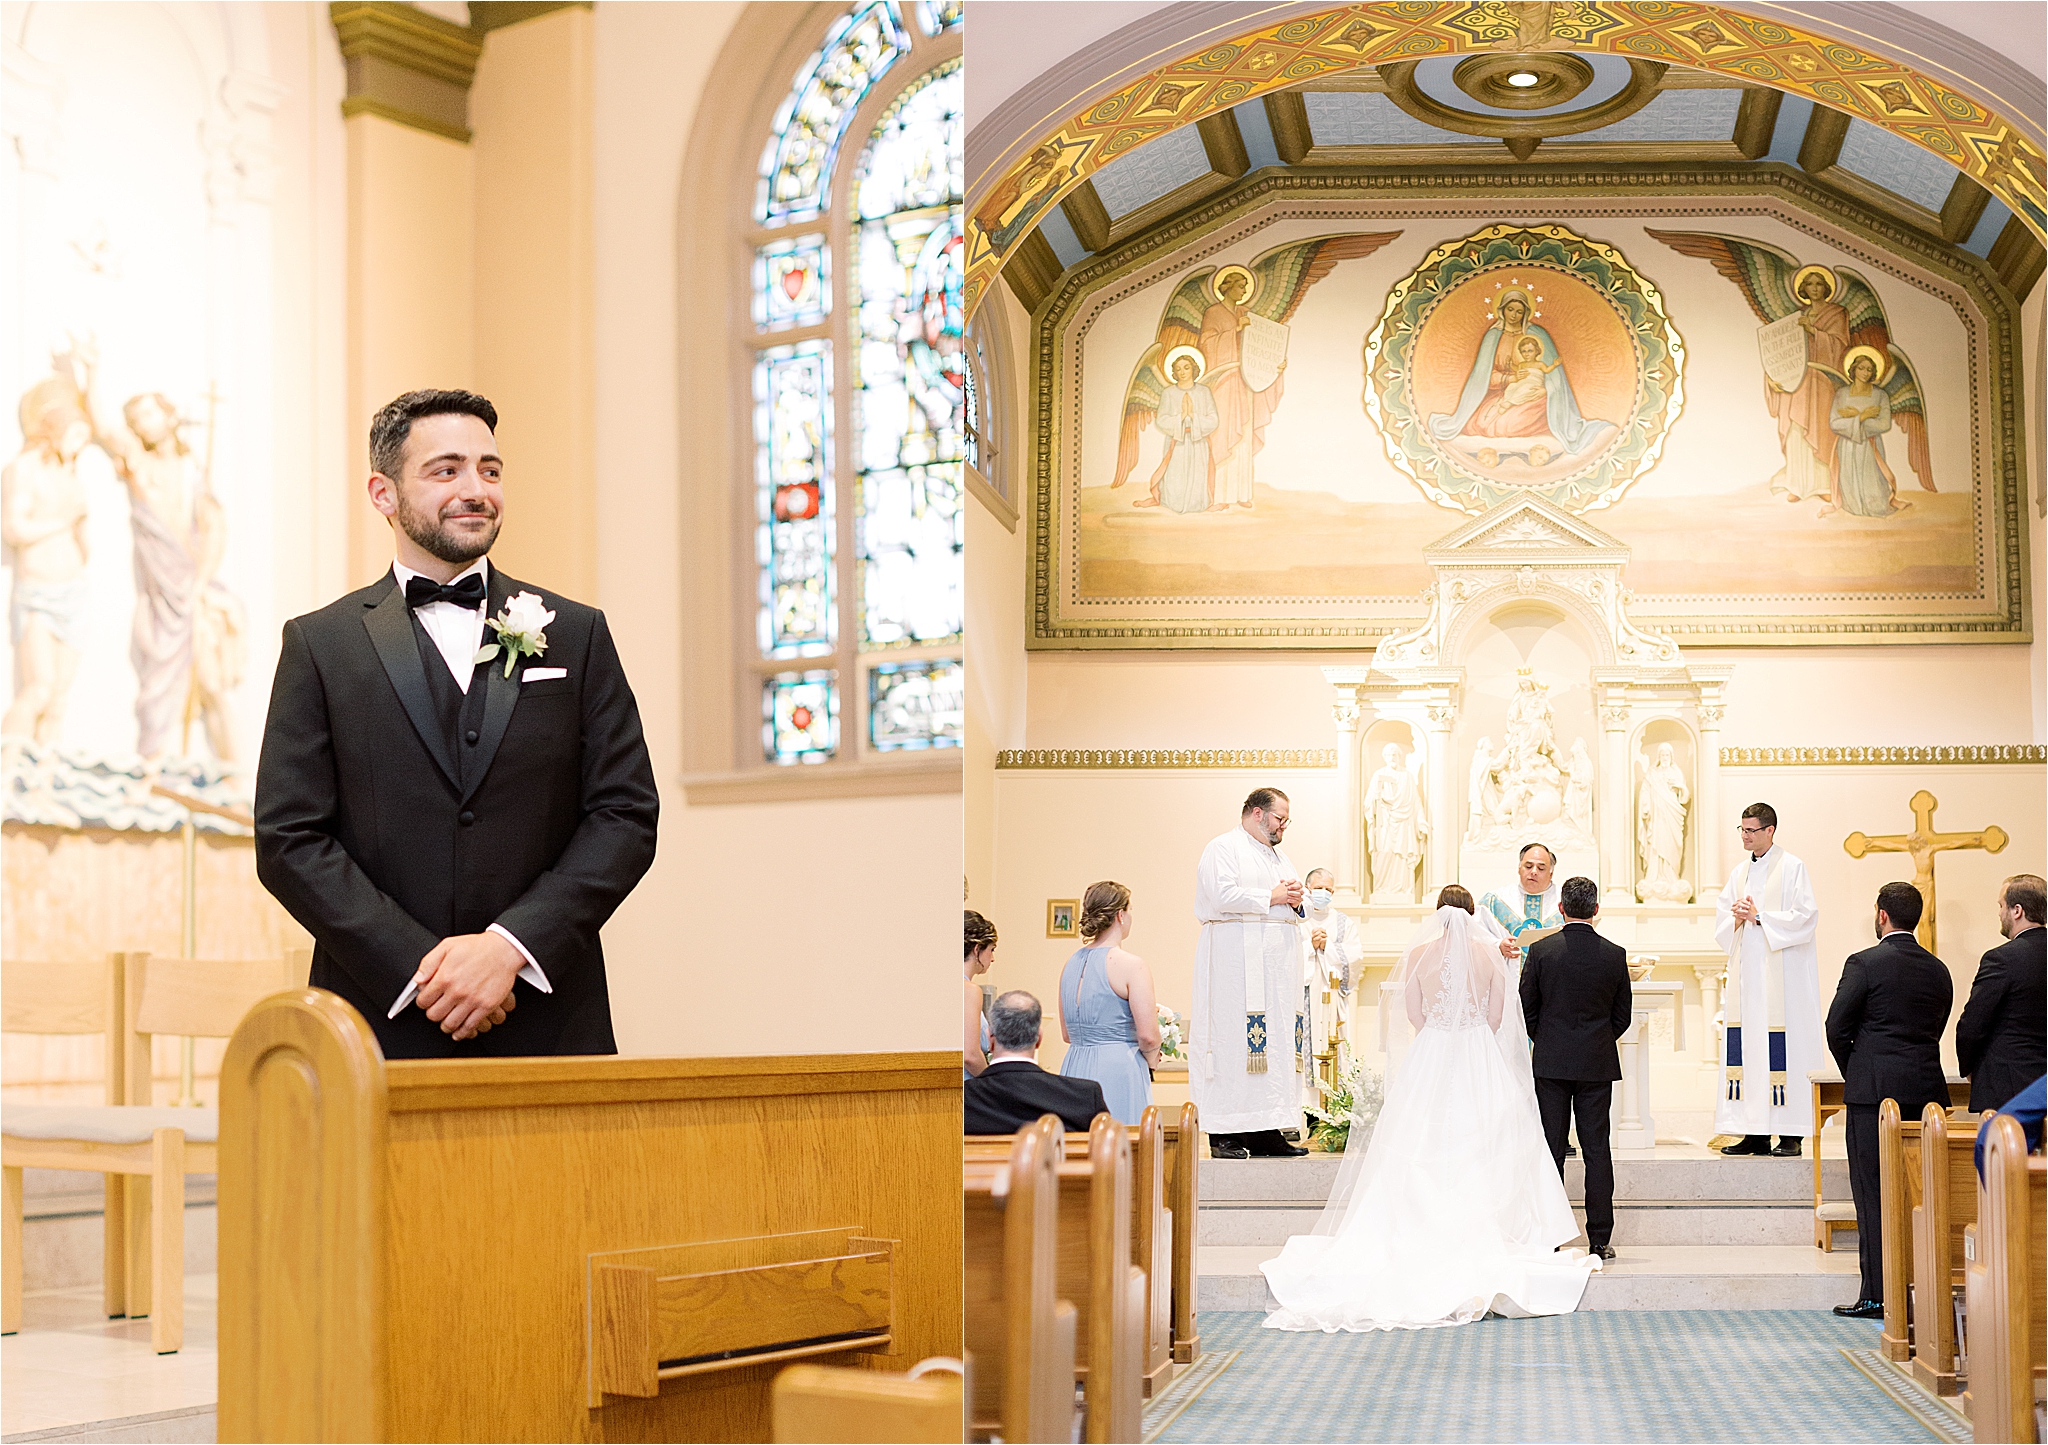 Groom watches bride come down the aisle at Cleveland Wedding